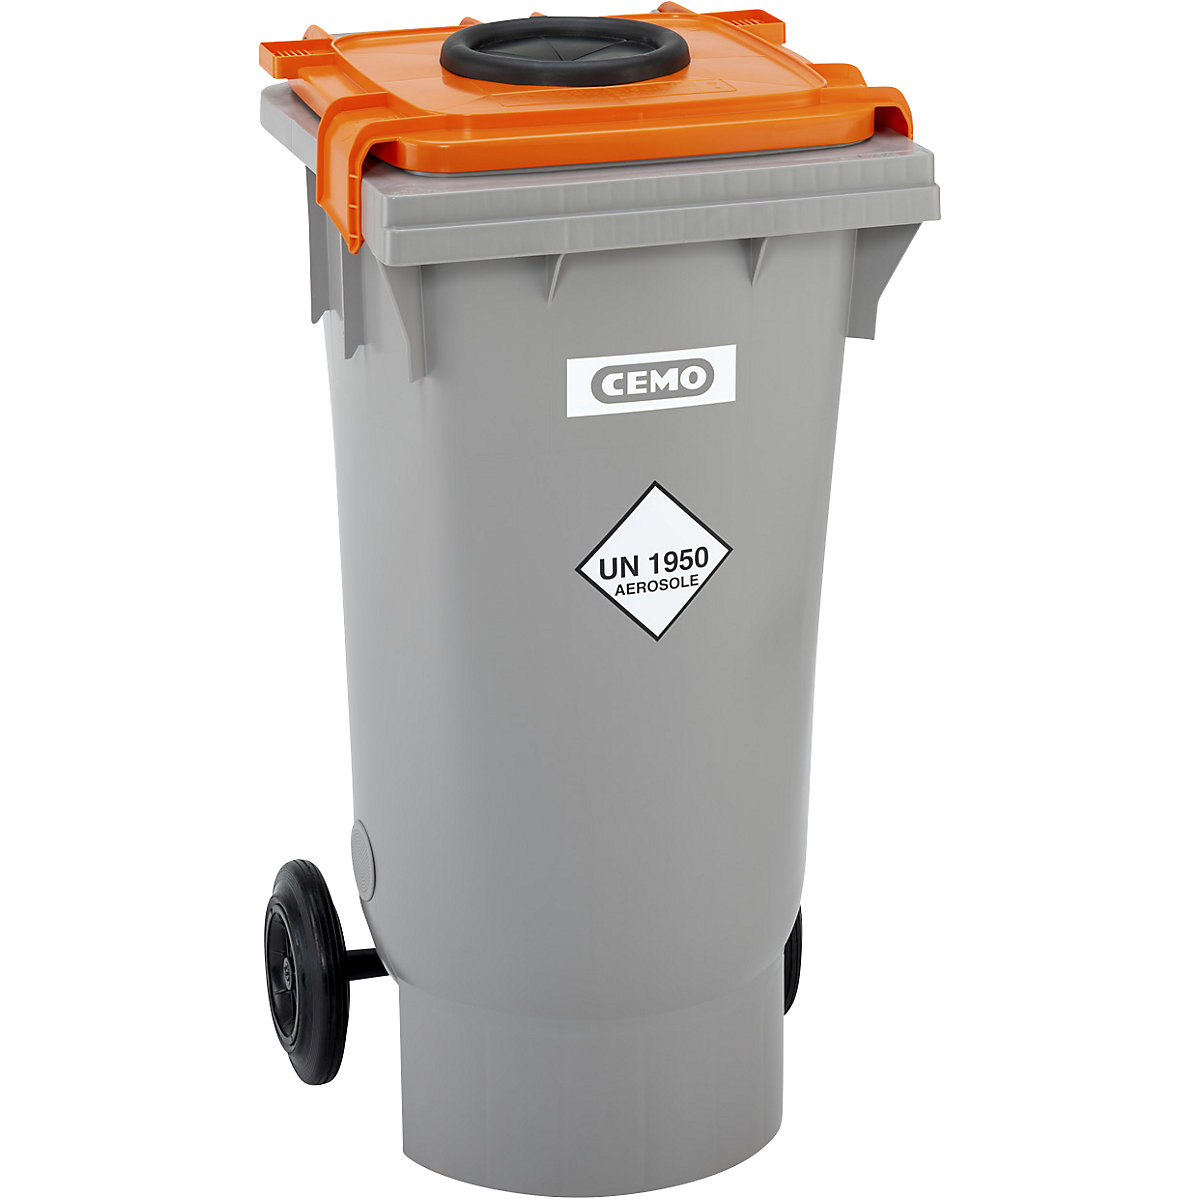 Spray can collection container – CEMO